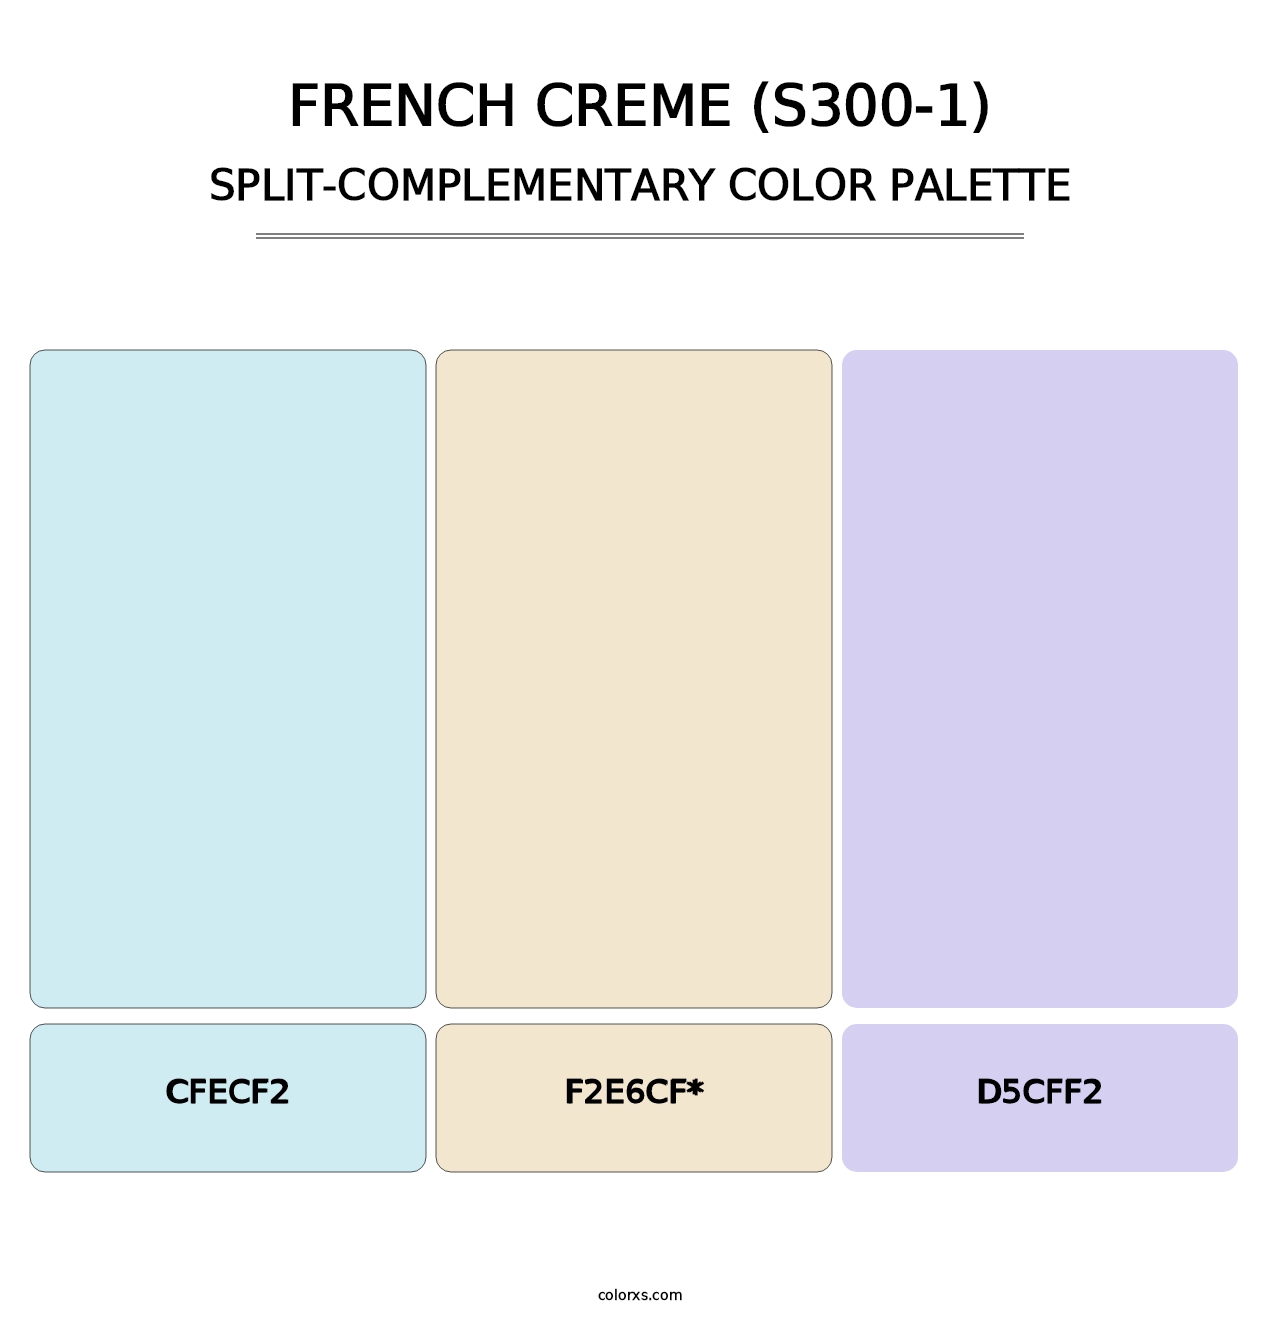 French Creme (S300-1) - Split-Complementary Color Palette